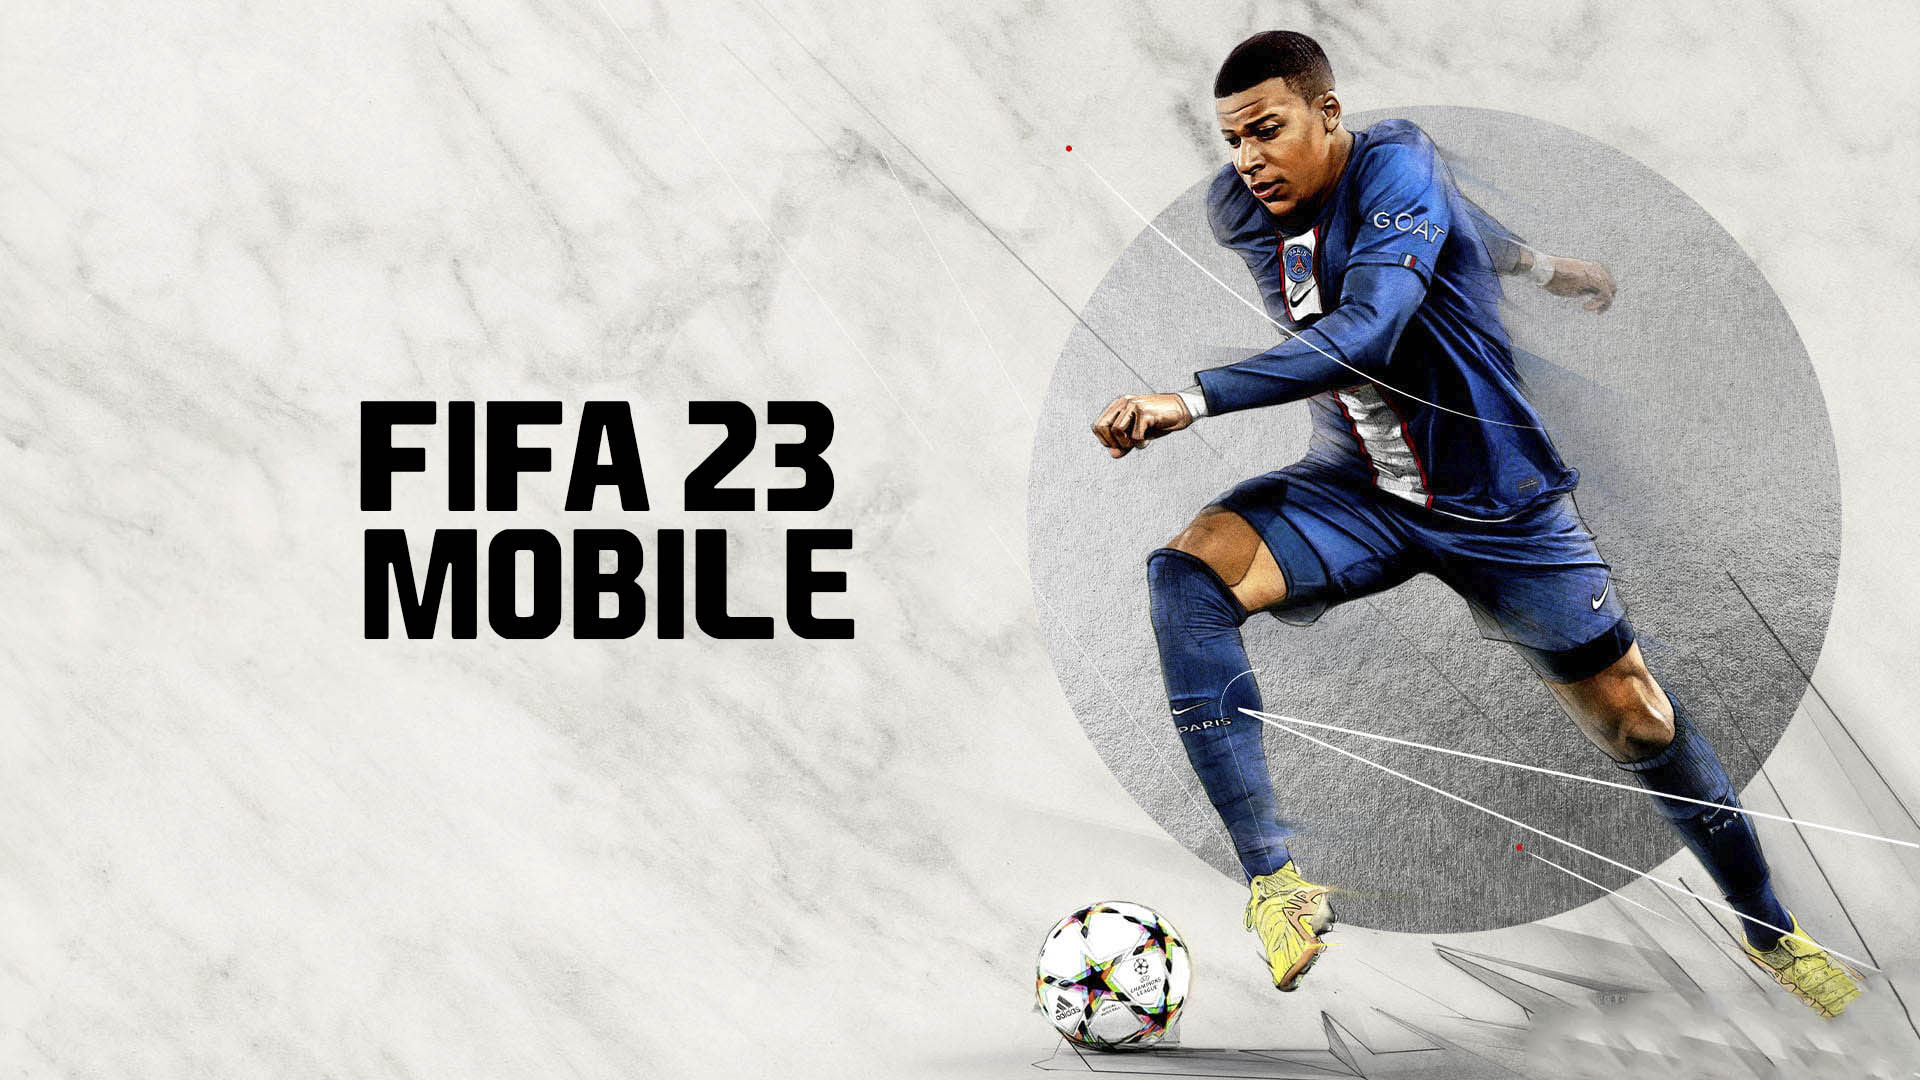 Download the game FIFA 23 for free] ‎‏‎‏ Enter the account and